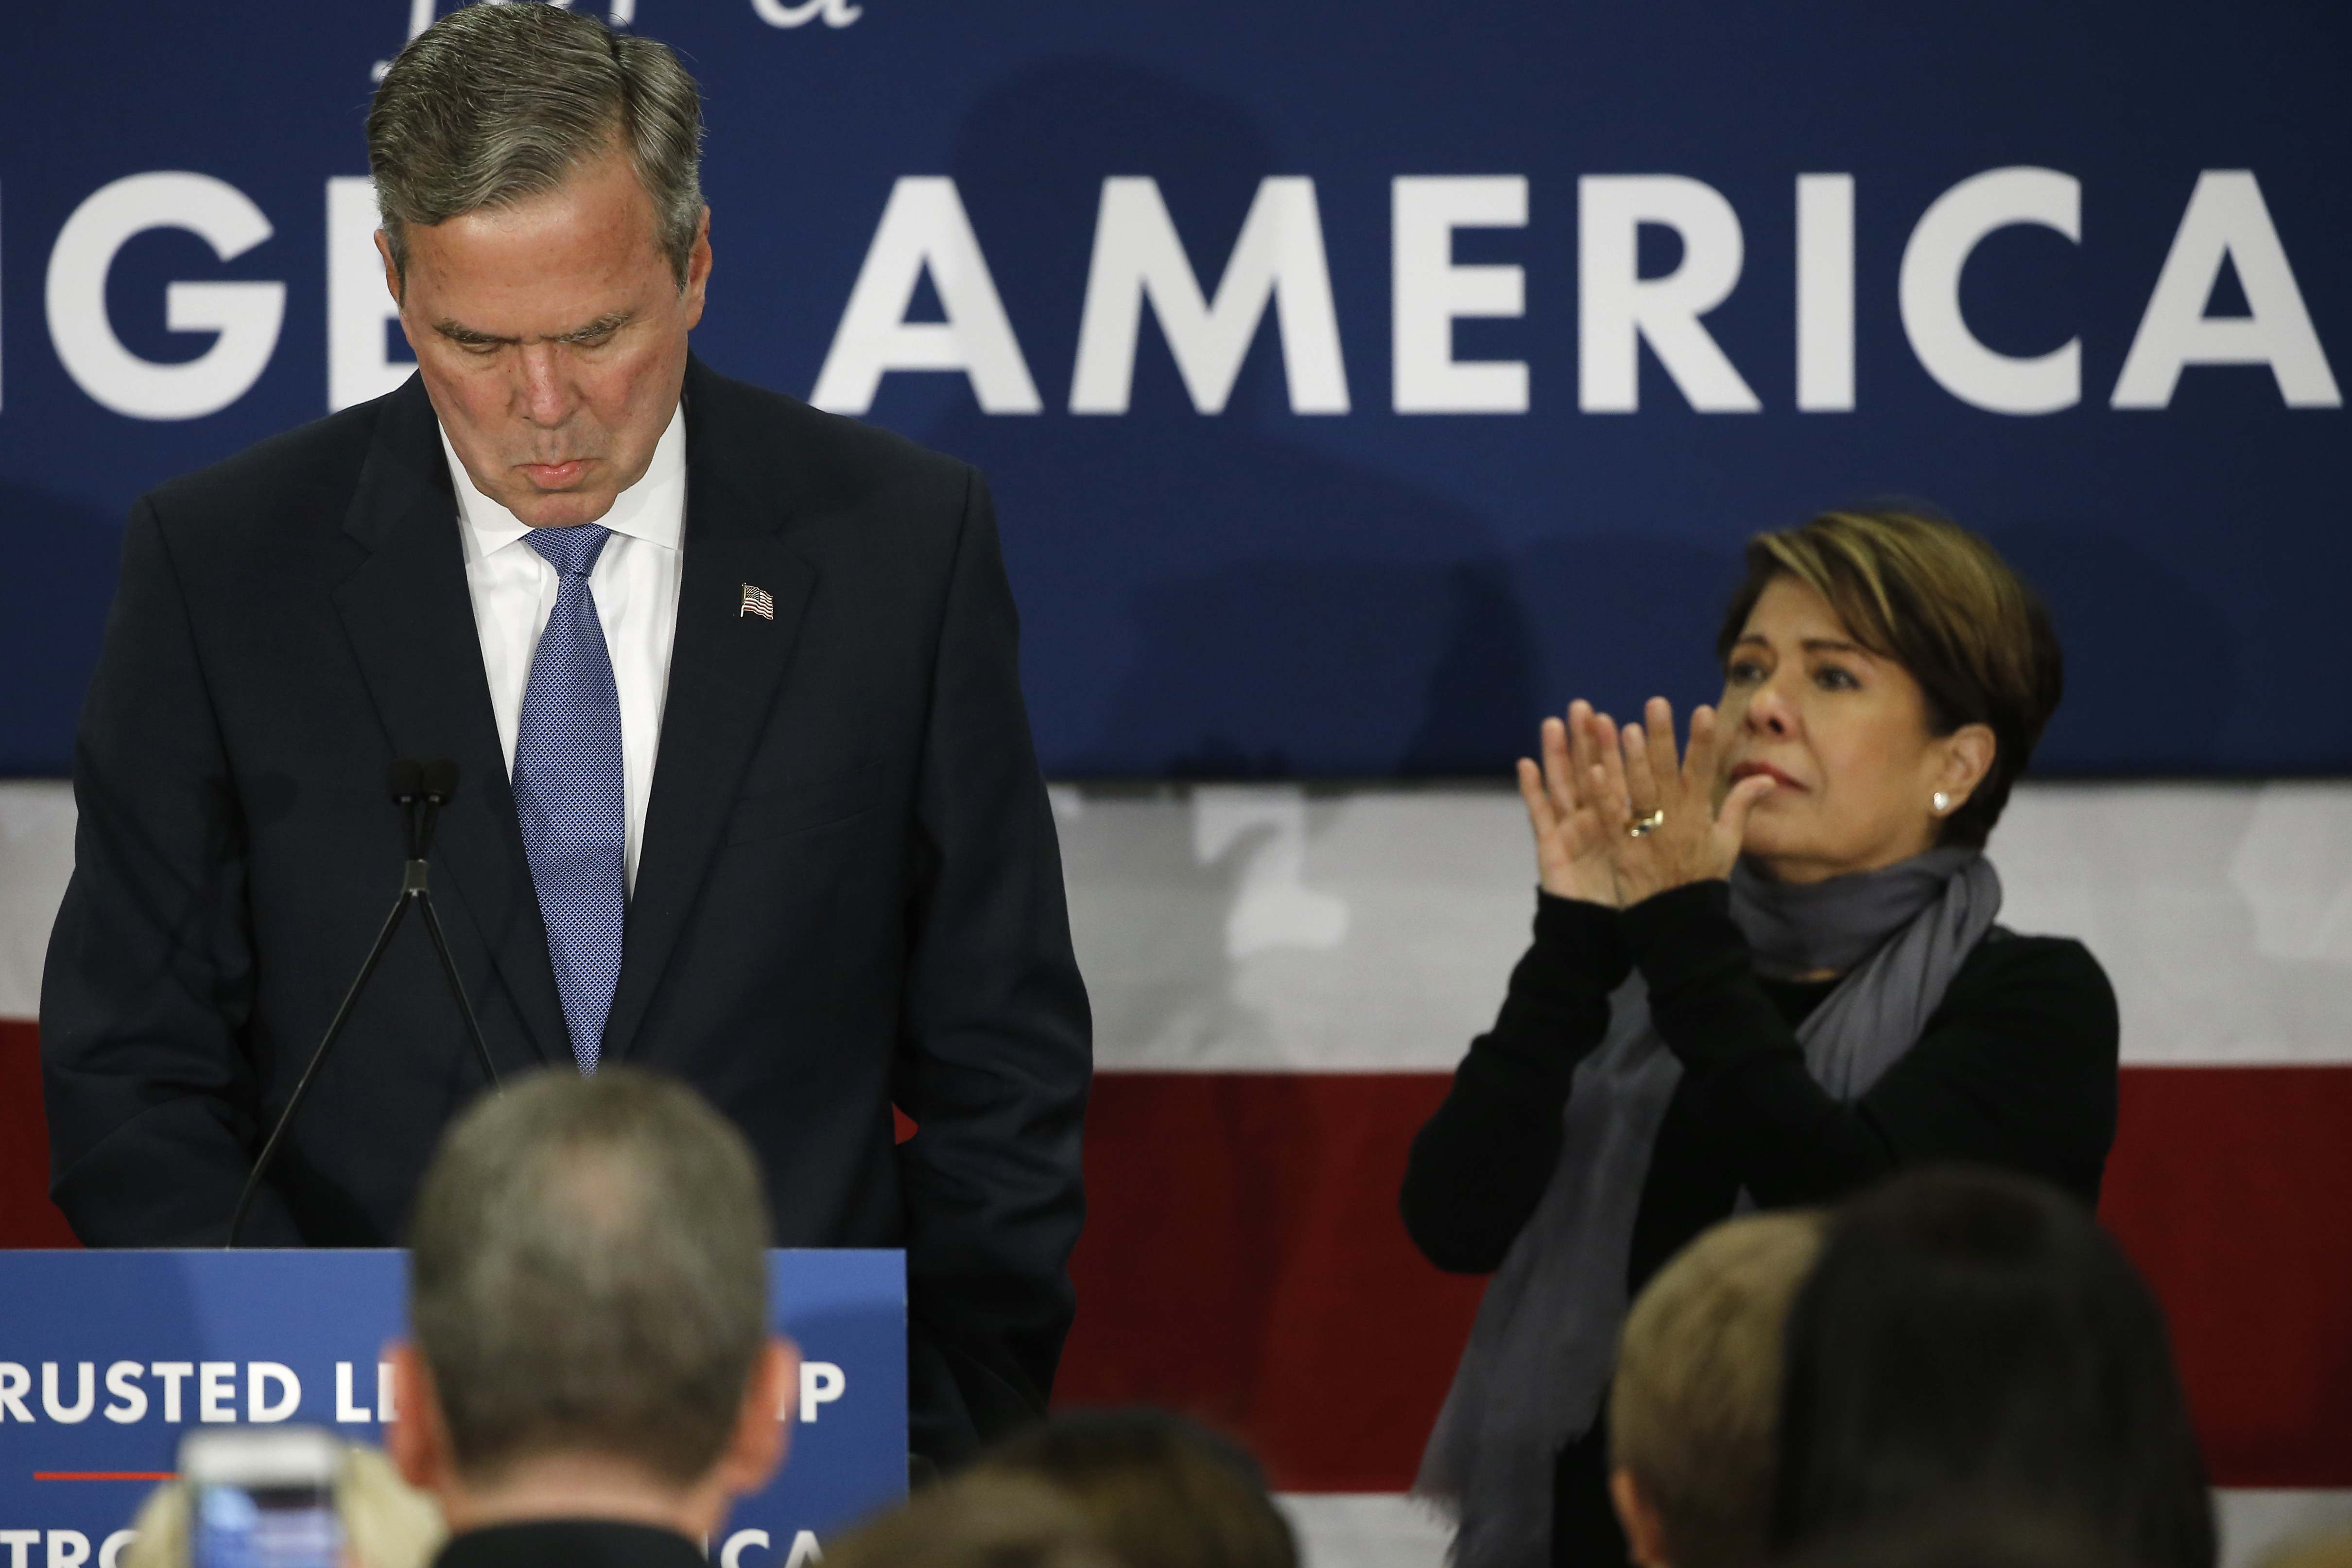 Republican presidential candidate, former Florida Gov. Jeb Bush accompanied by his wife Columba, speaks at his South Carolina Republican presidential primary rally in Columbia, S.C., Saturday, Feb. 20, 2016, (AP Photo/Matt Rourke)